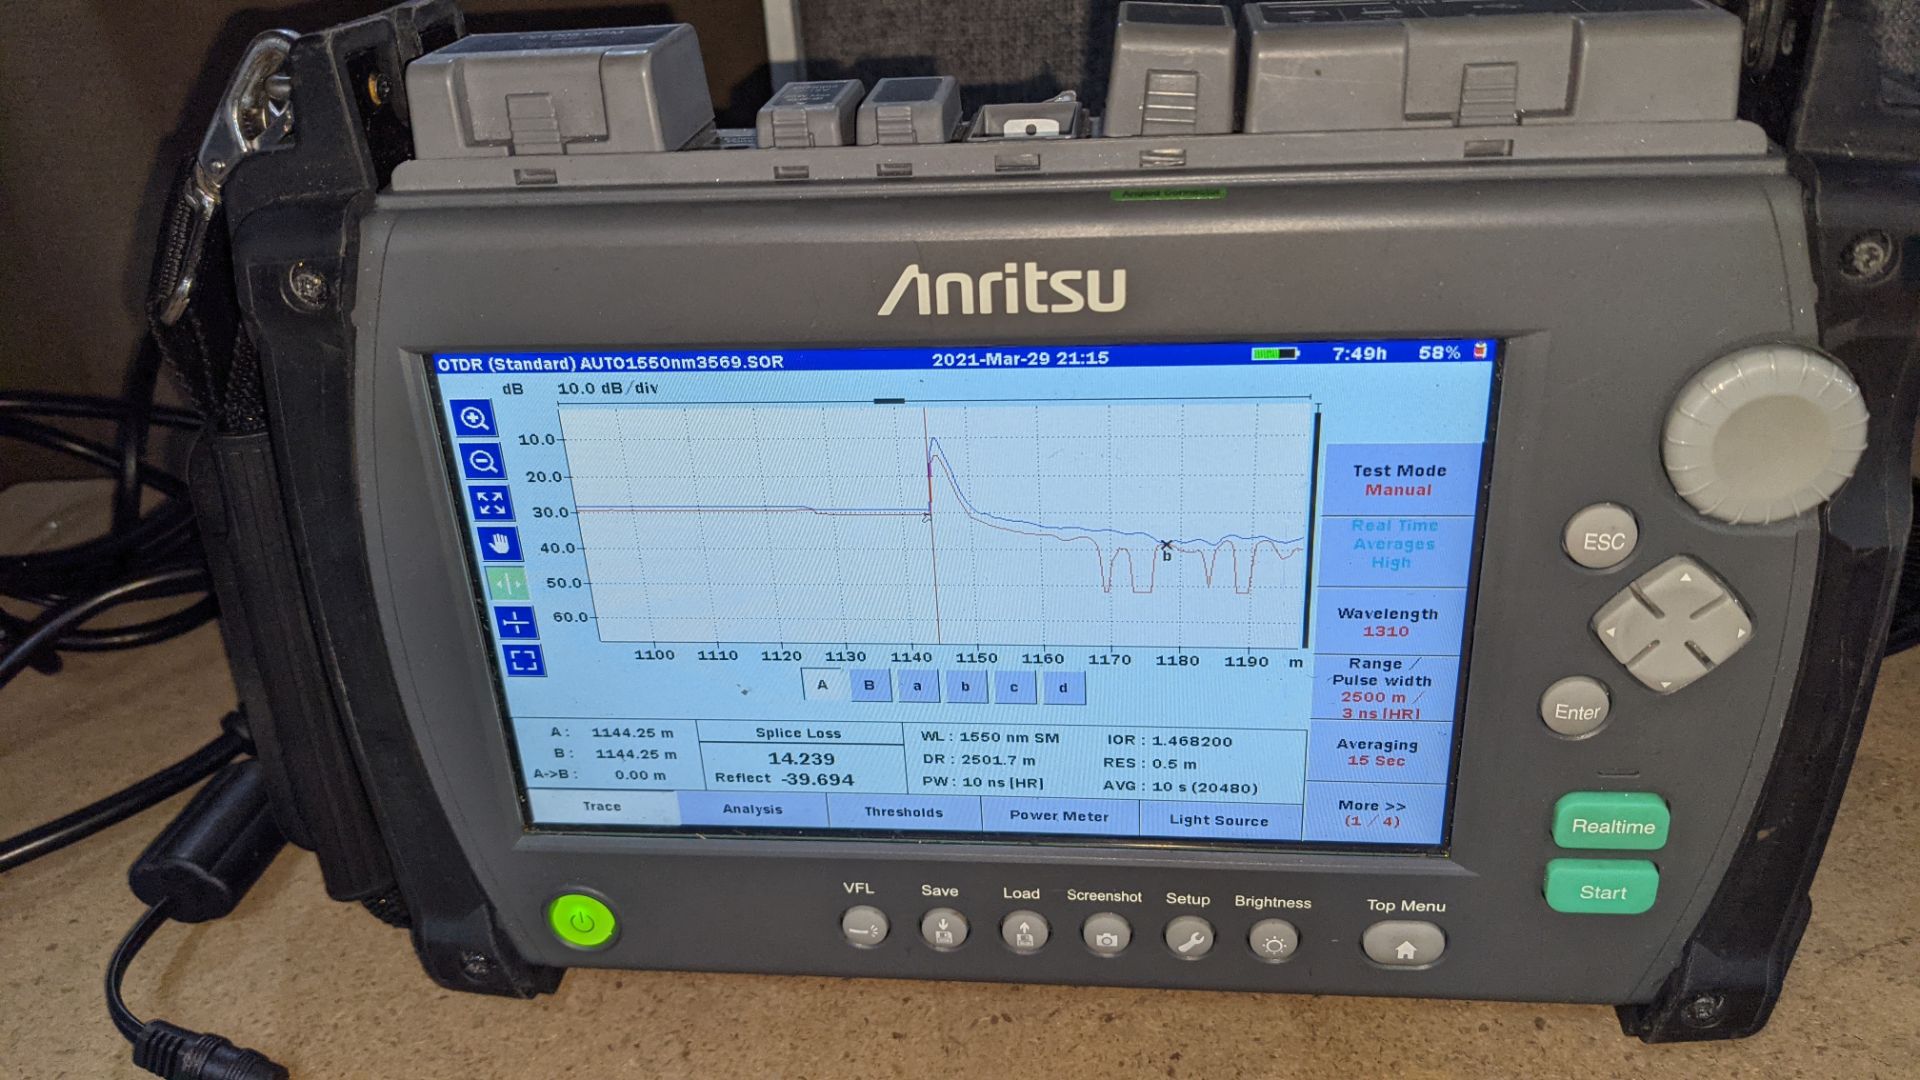 Anritsu MT9085A-053-SMF OTDR ACCESS Master with touchscreen. - Image 13 of 25